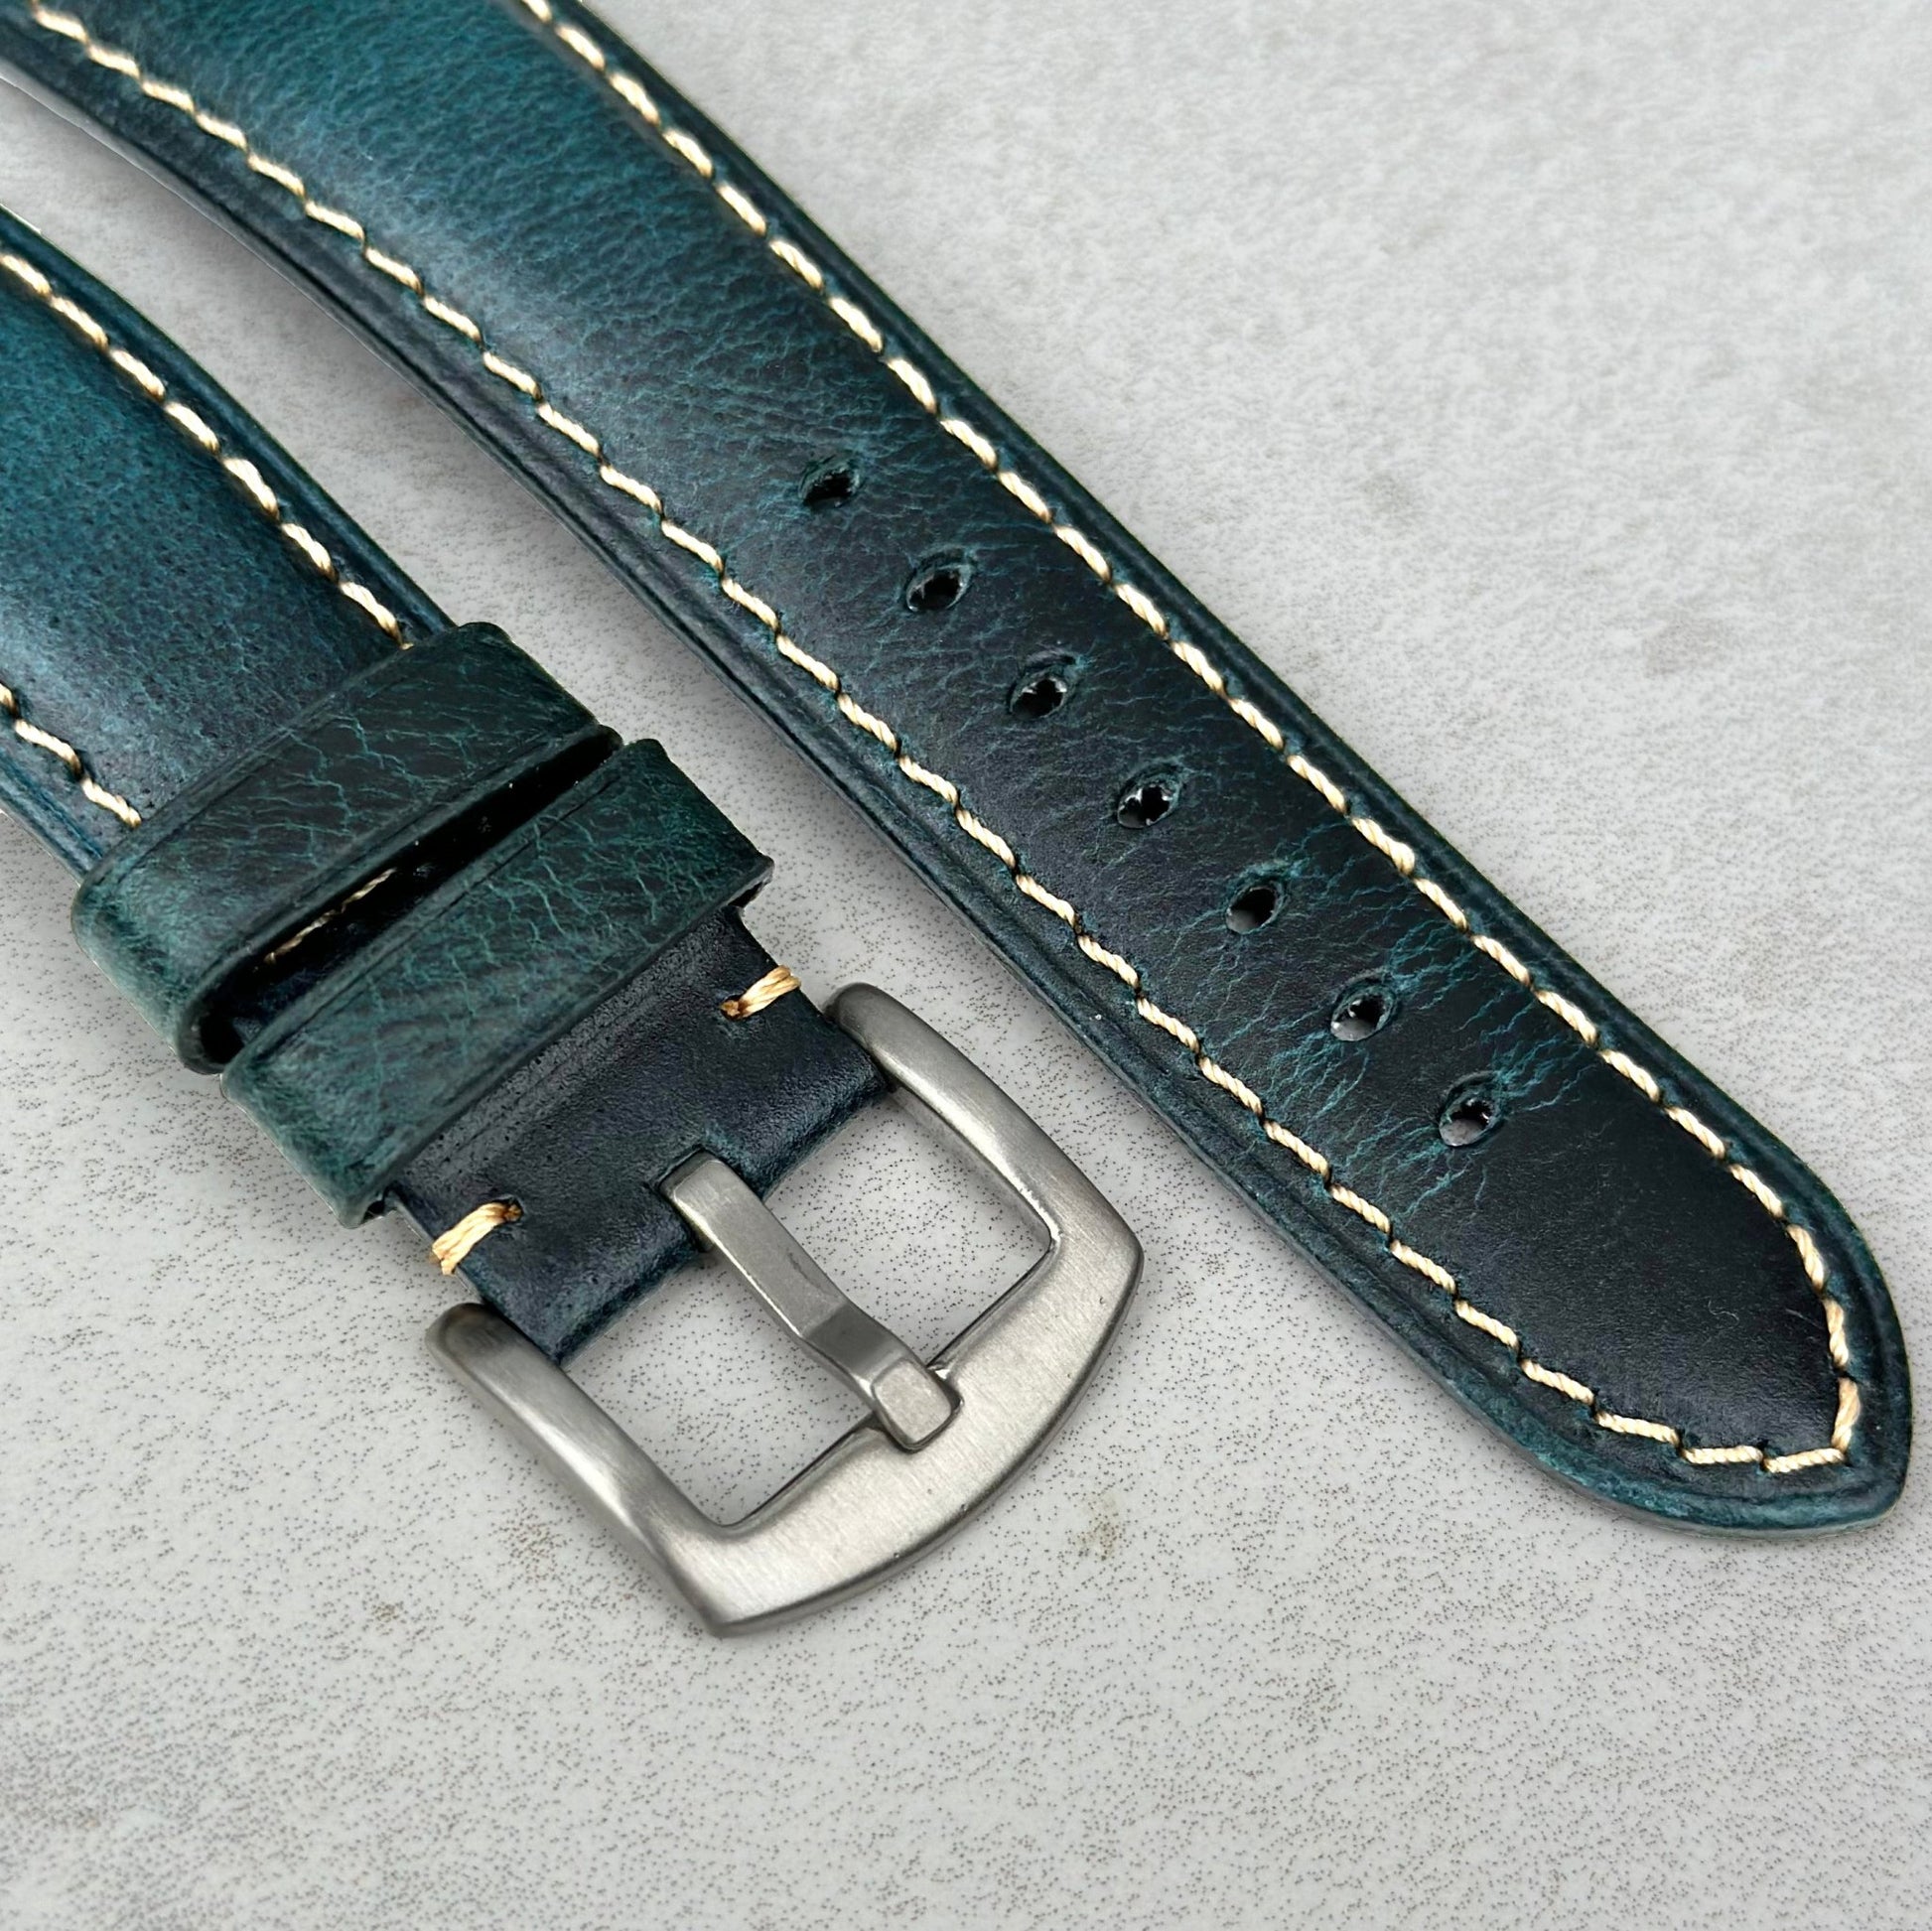 Brushed 316L stainless steel buckle on the Berlin blue full grain leather watch strap. Electric blue leather ivory stitching.